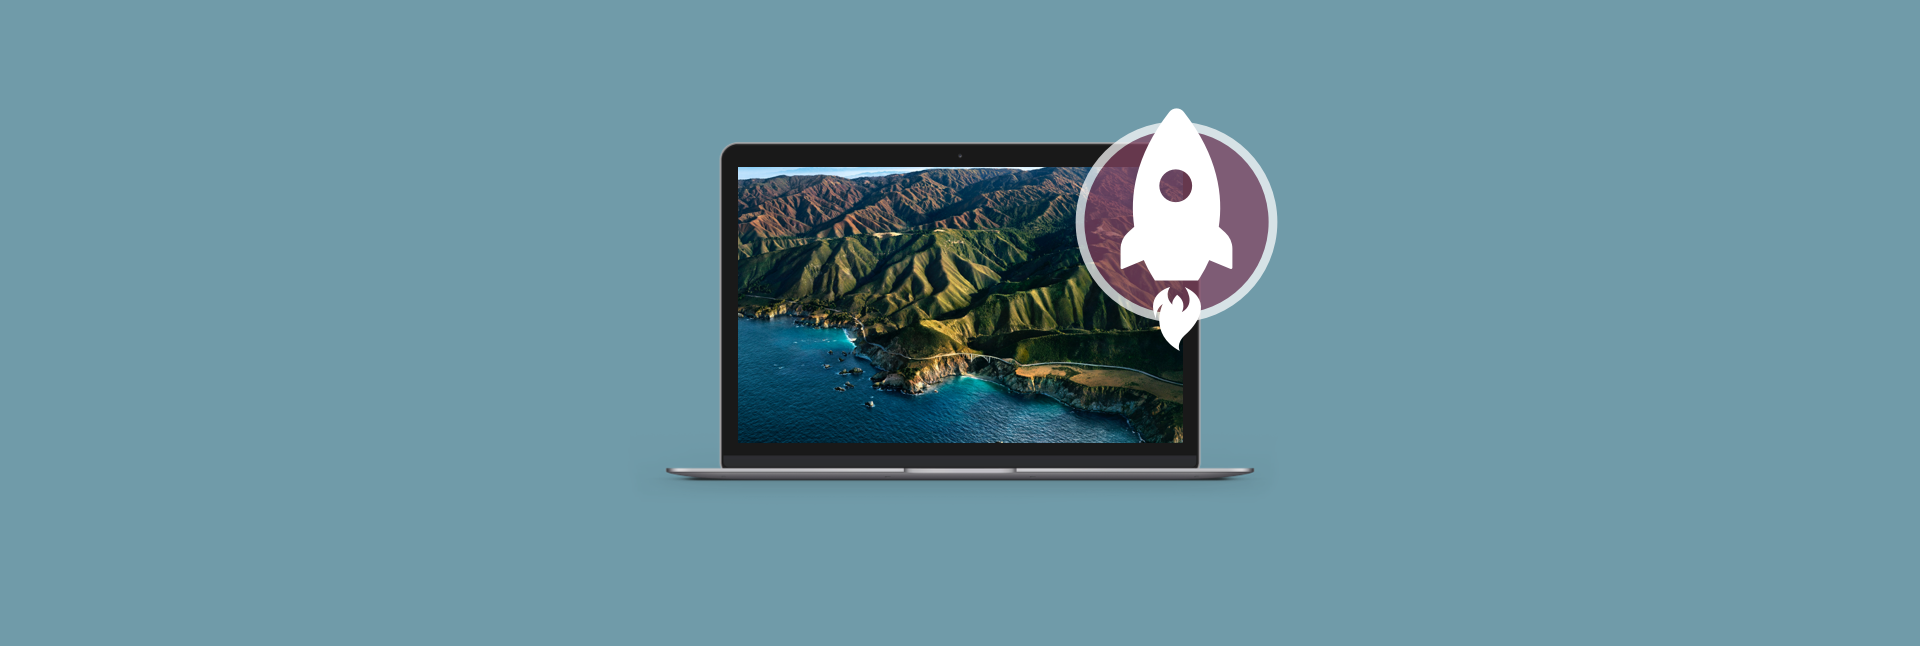 free alternative to ccleaner for mac